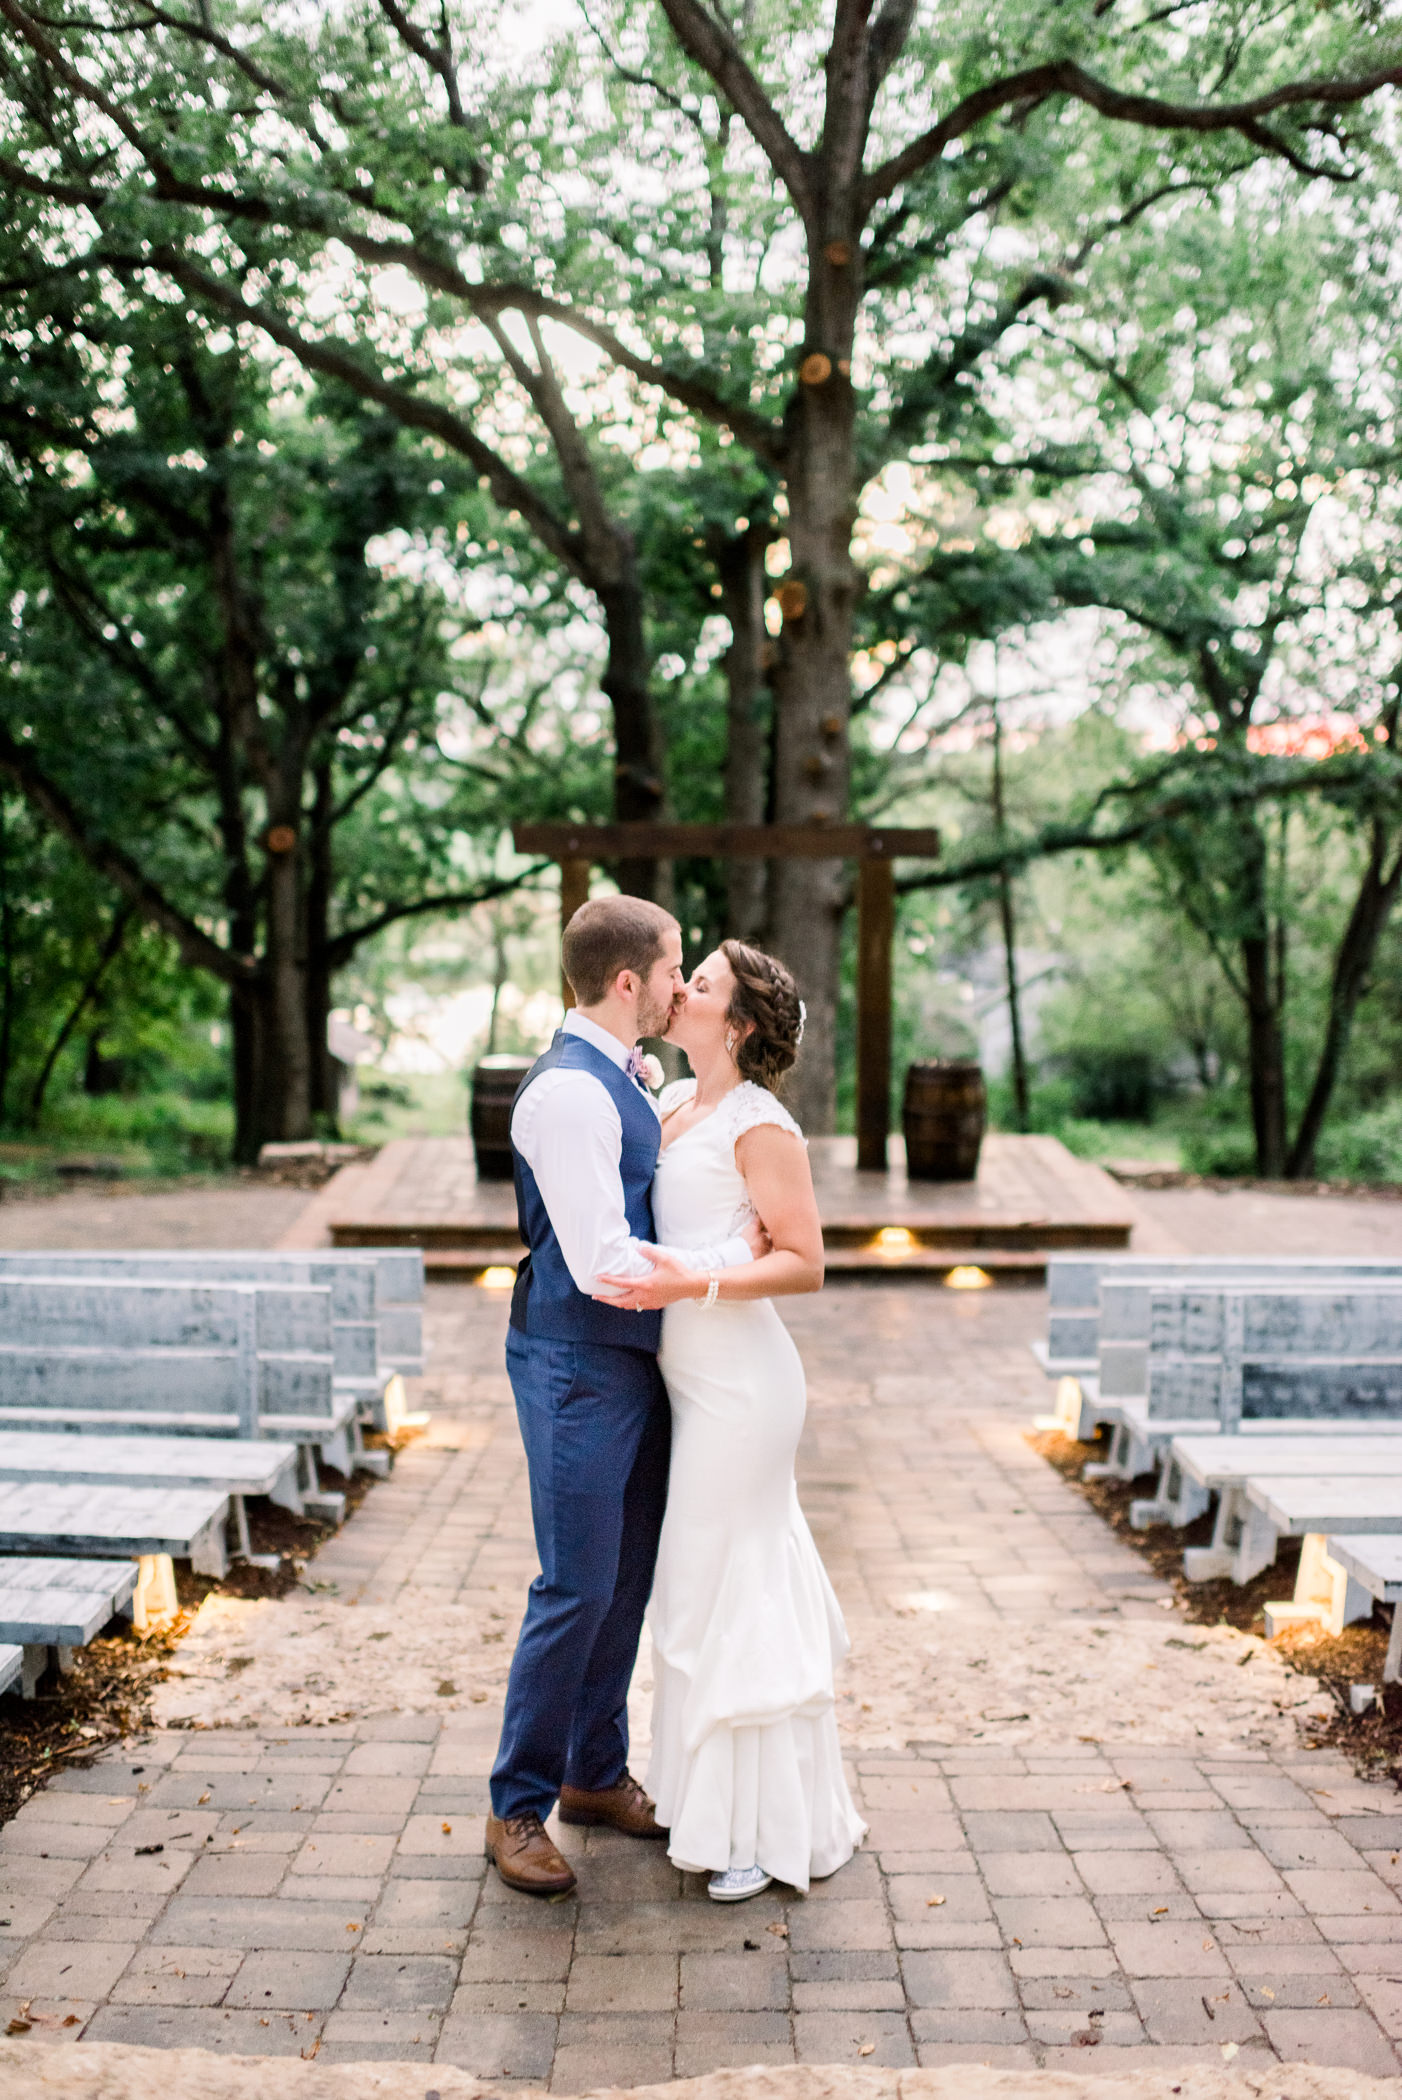 The Fields Reserve Wedding Day - Larissa Marie Photography